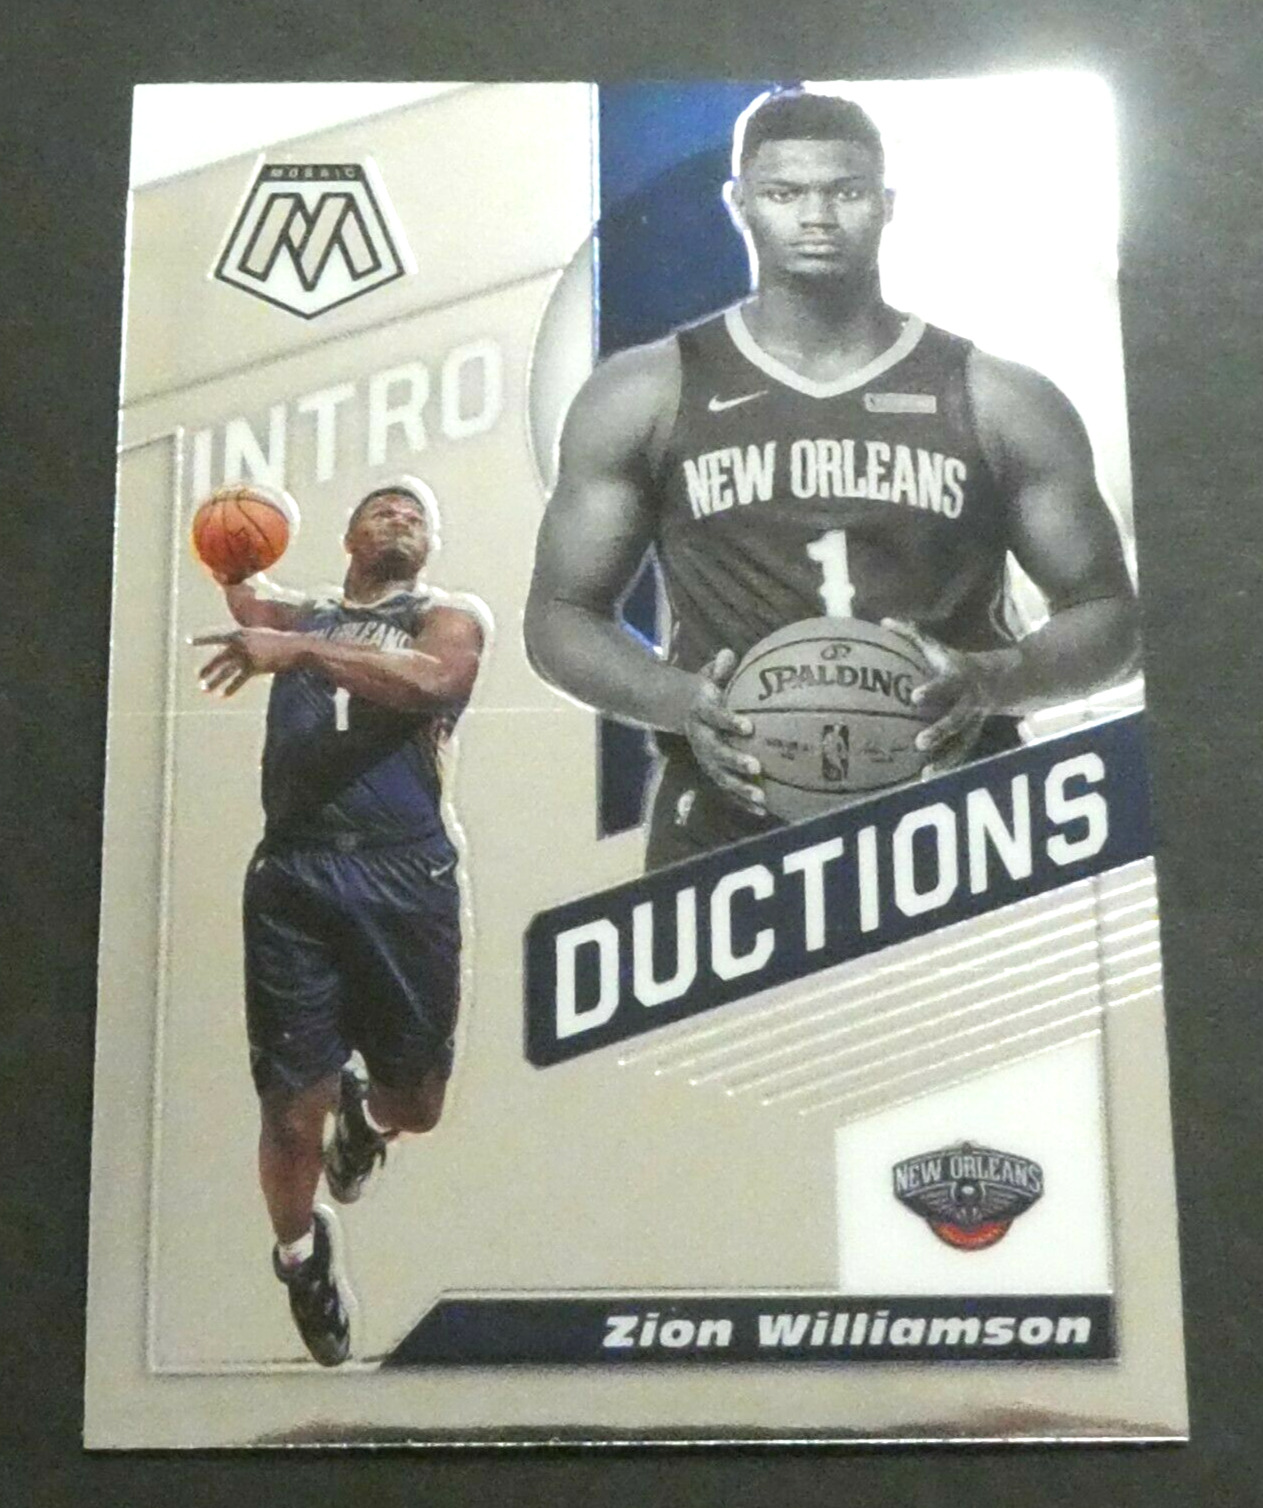 2019-20 Panini Mosaic Introductions Zion Williamson #5 New Orleans Pelicans